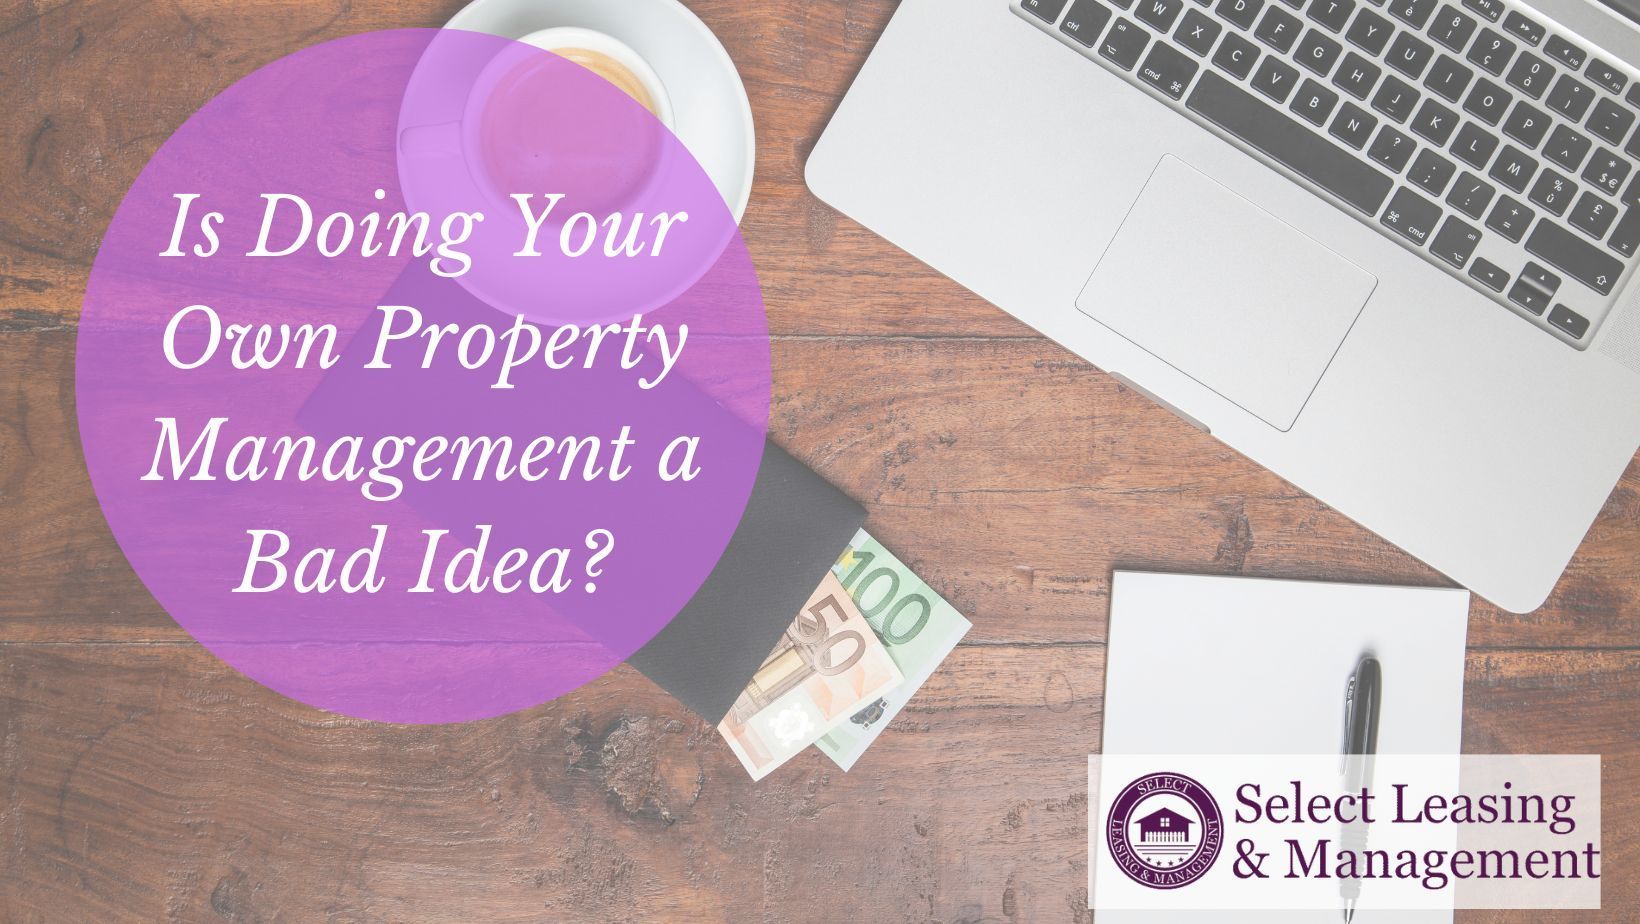 is doing your own property management a bad idea